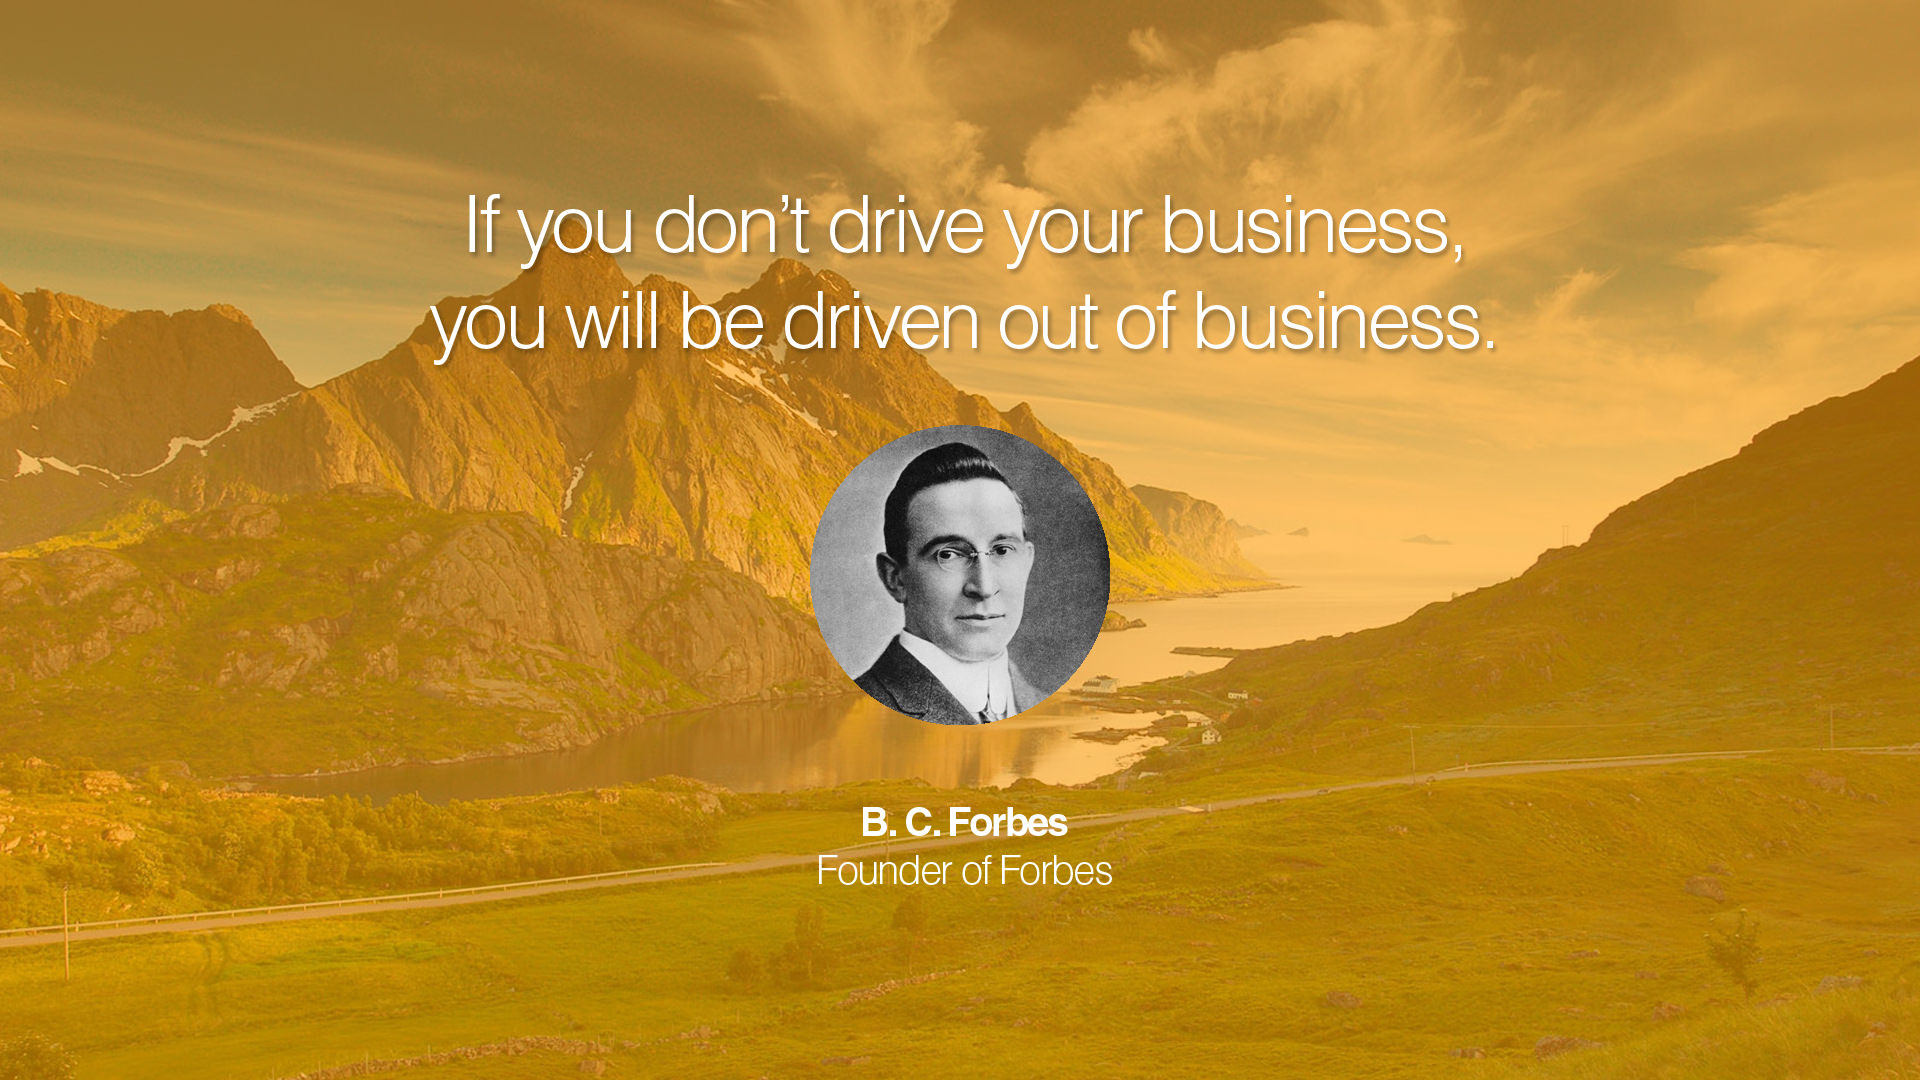 21 Quotes By Billionaires And Business Icons For Aspiring Entrepreneur